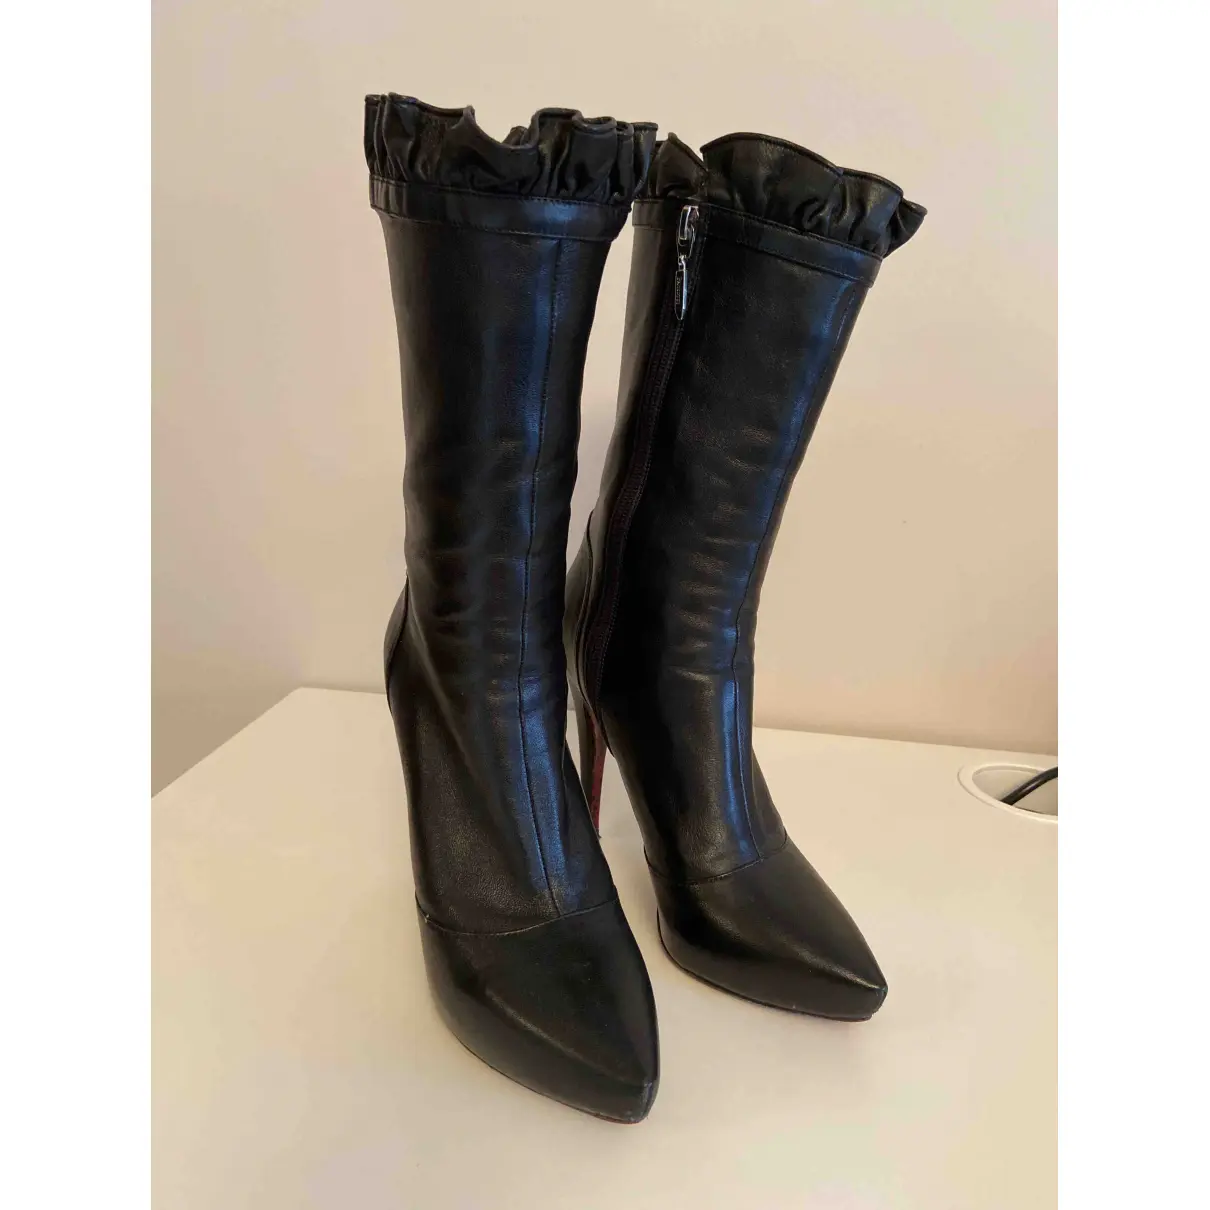 Buy Cesare Paciotti Leather boots online